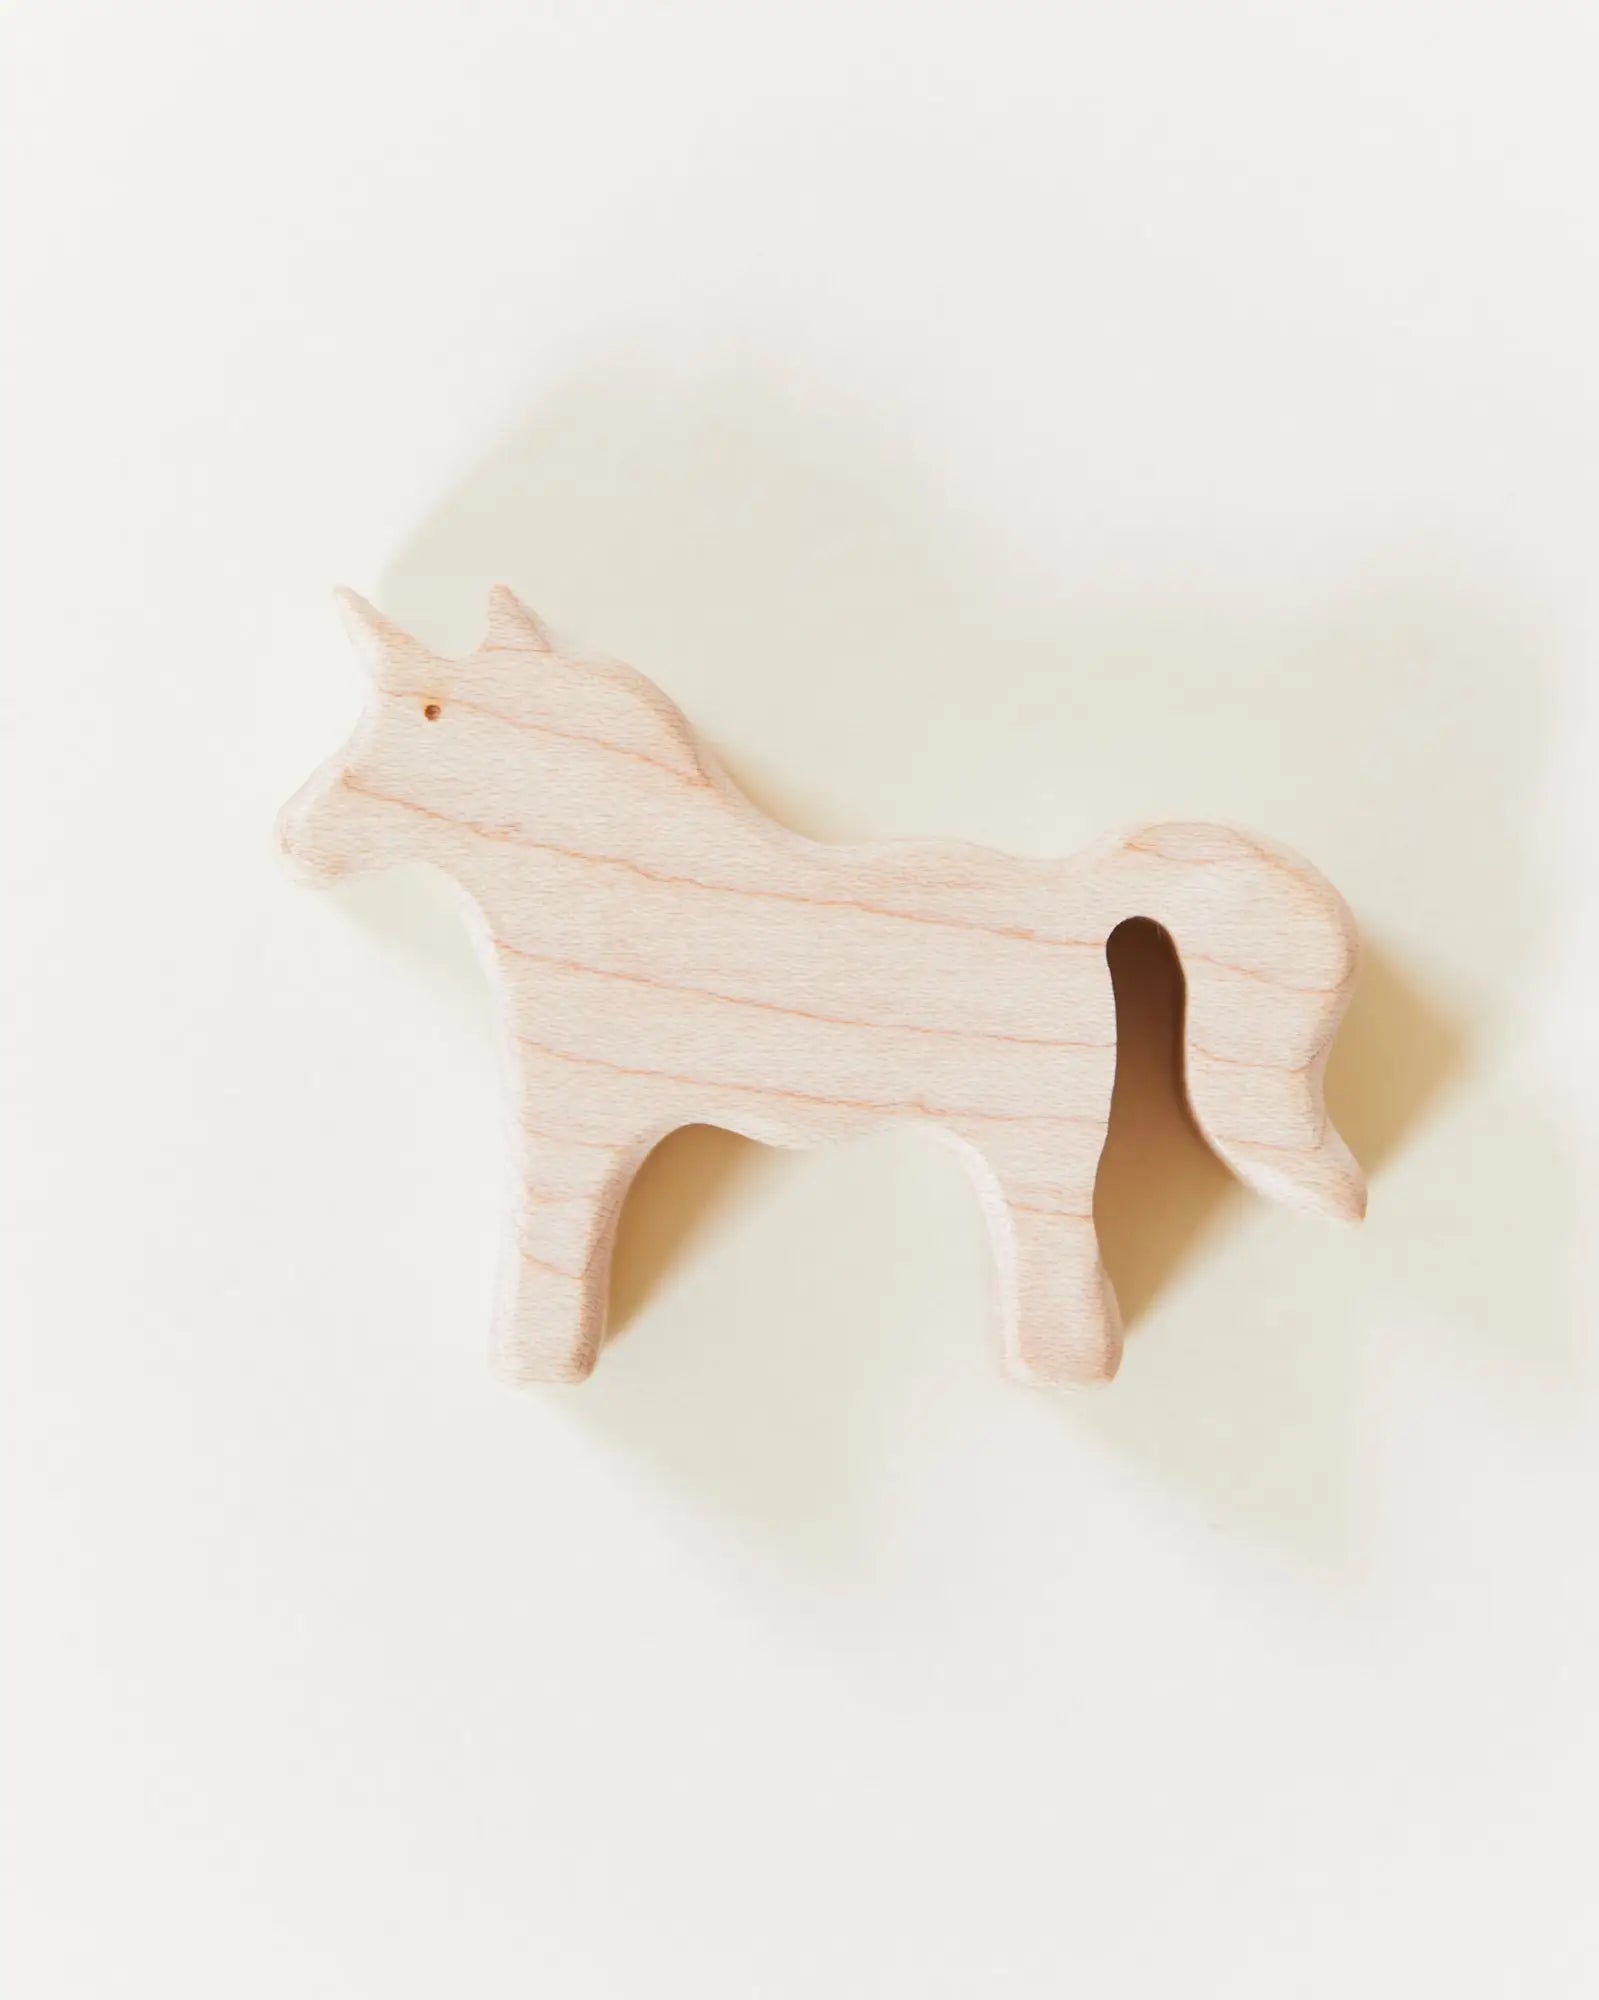 Wooden Unicorn in Mahogany or Maple Wood